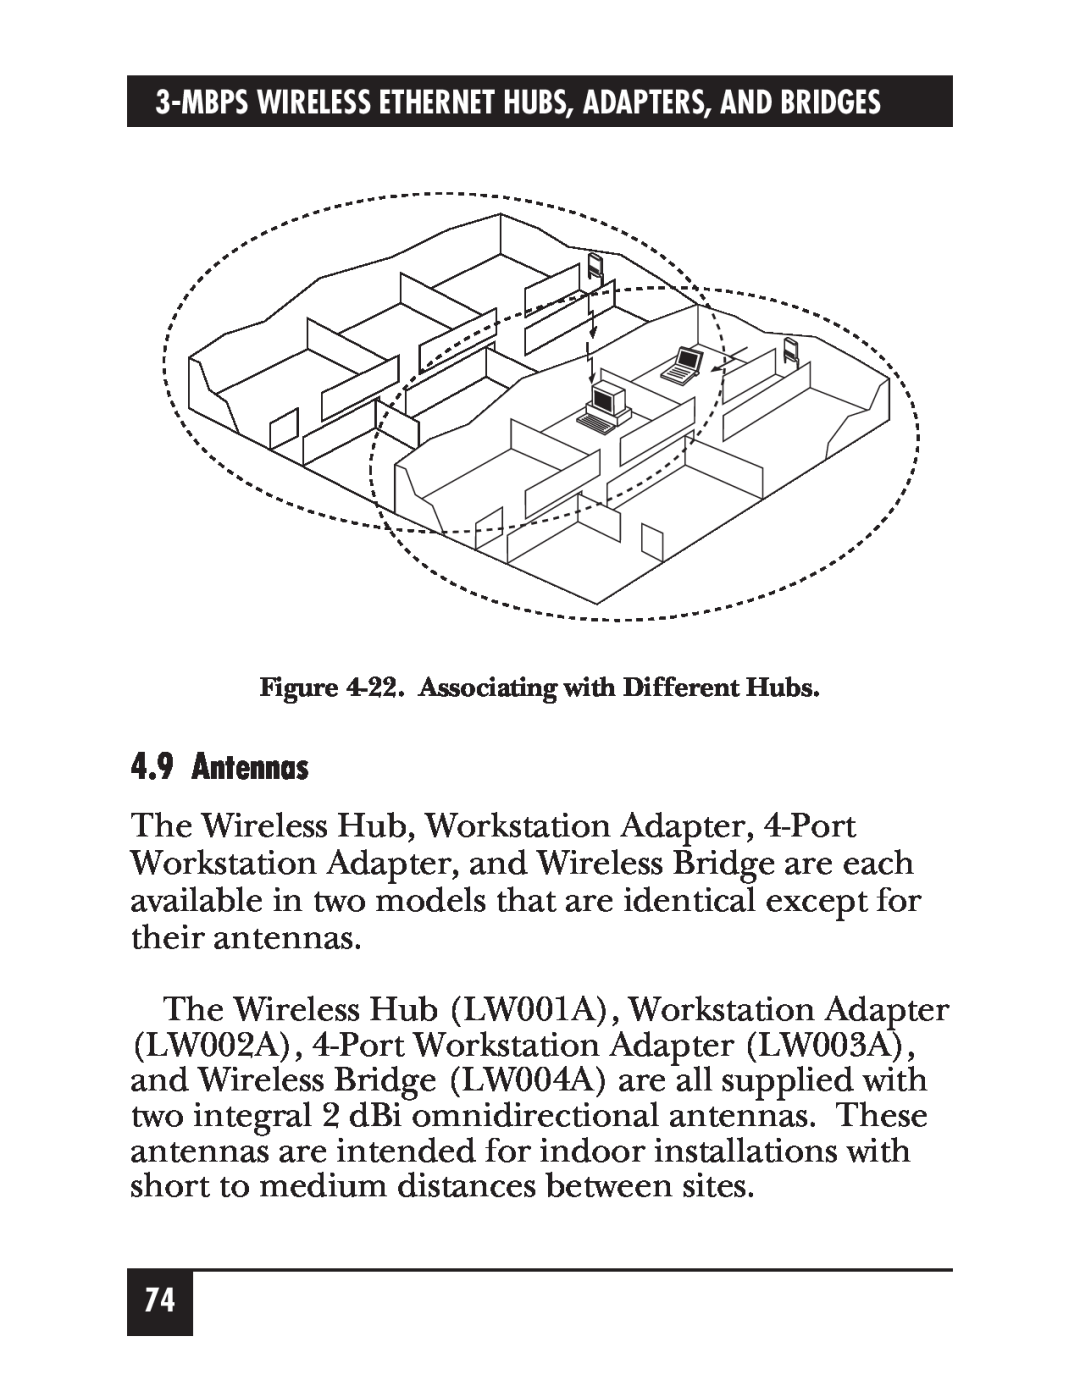 Black Box LW010A, LW012AE, LW011AE, LW008A, LW005A, LW009A, LW003A, LW002A manual Antennas, 22. Associating with Different Hubs 